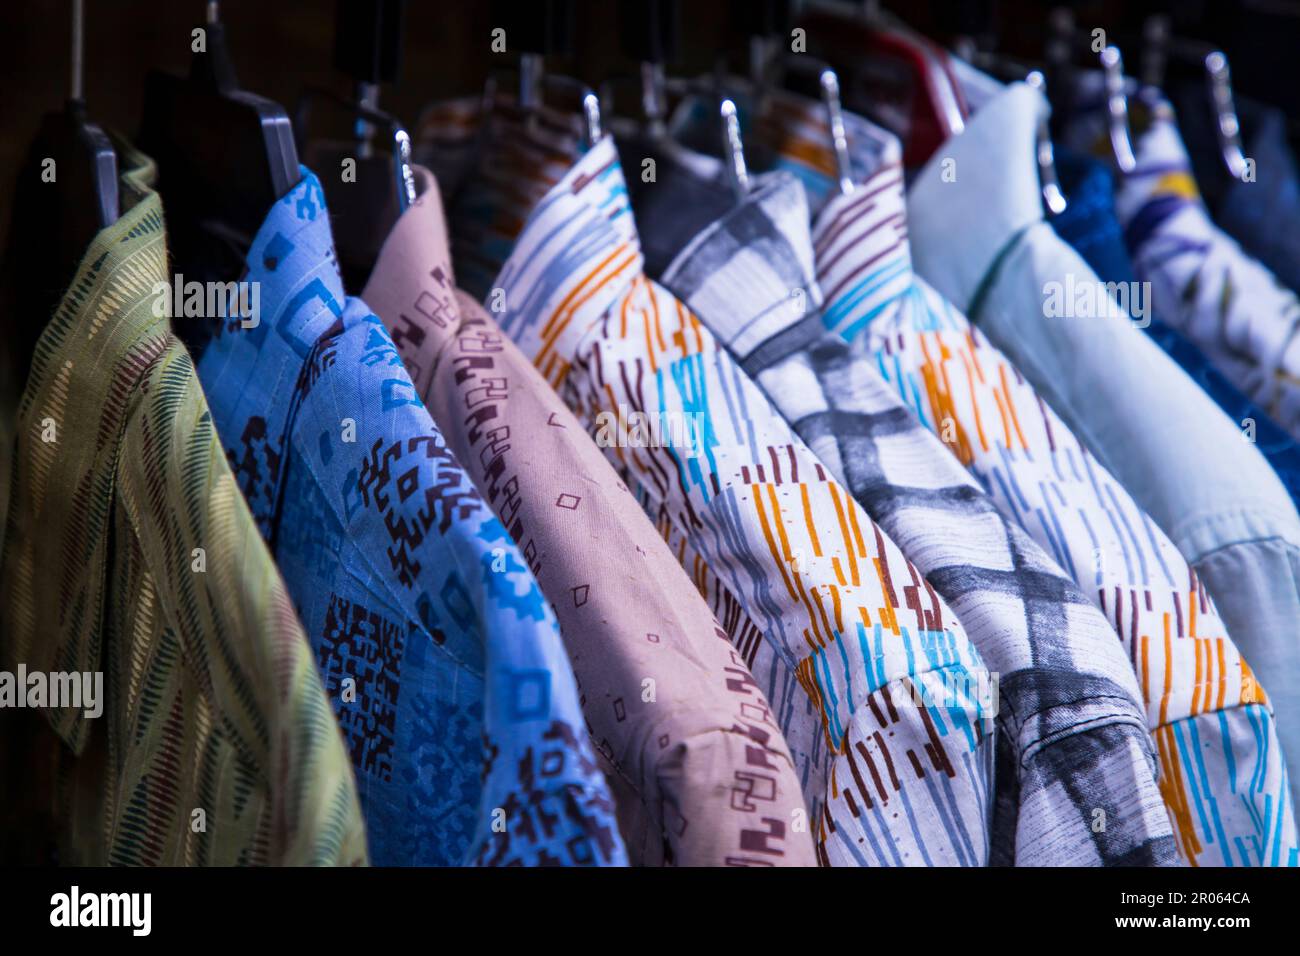 Colorful variety of Shirts  hangings in a clothing Showroom. Cluse-up Focus Stock Photo